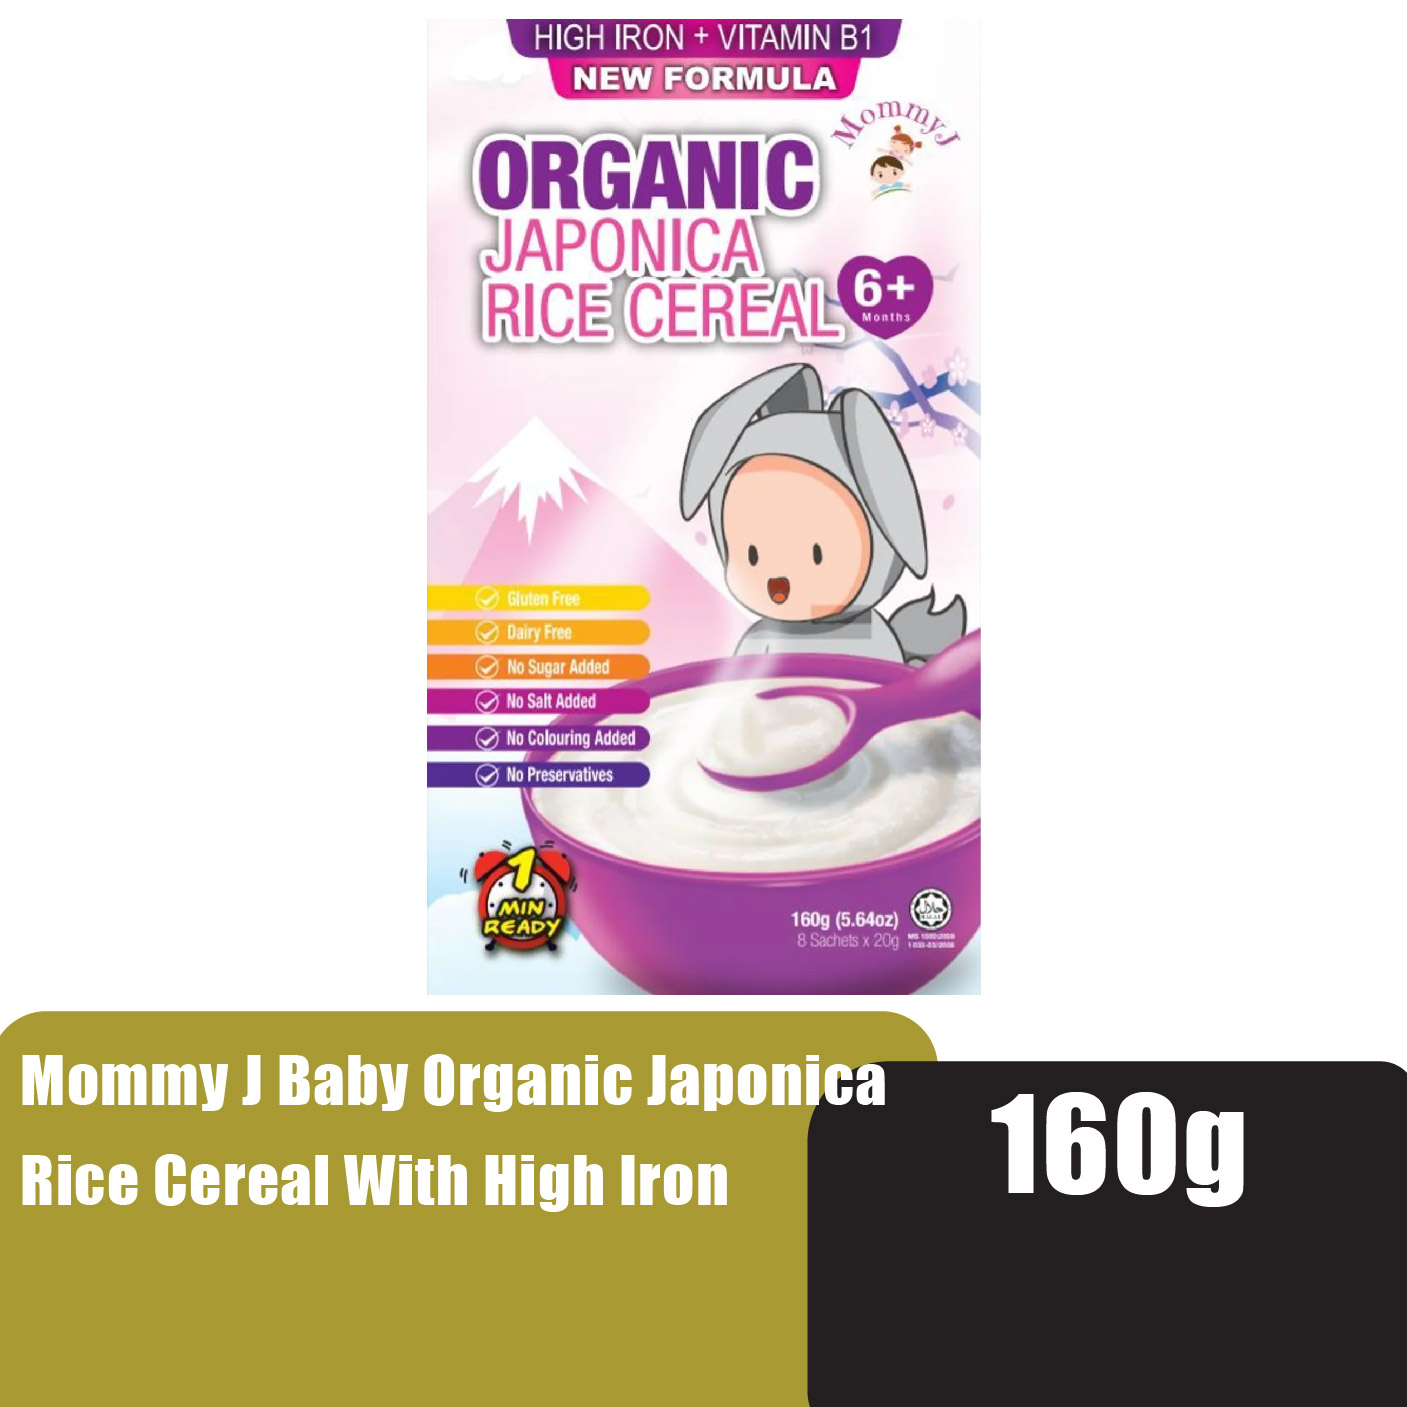 MOMMY J Baby Organic Japonica Rice Cereal With High Iron 160g - Halal Baby Food, Makanan Baby for 6+ Months